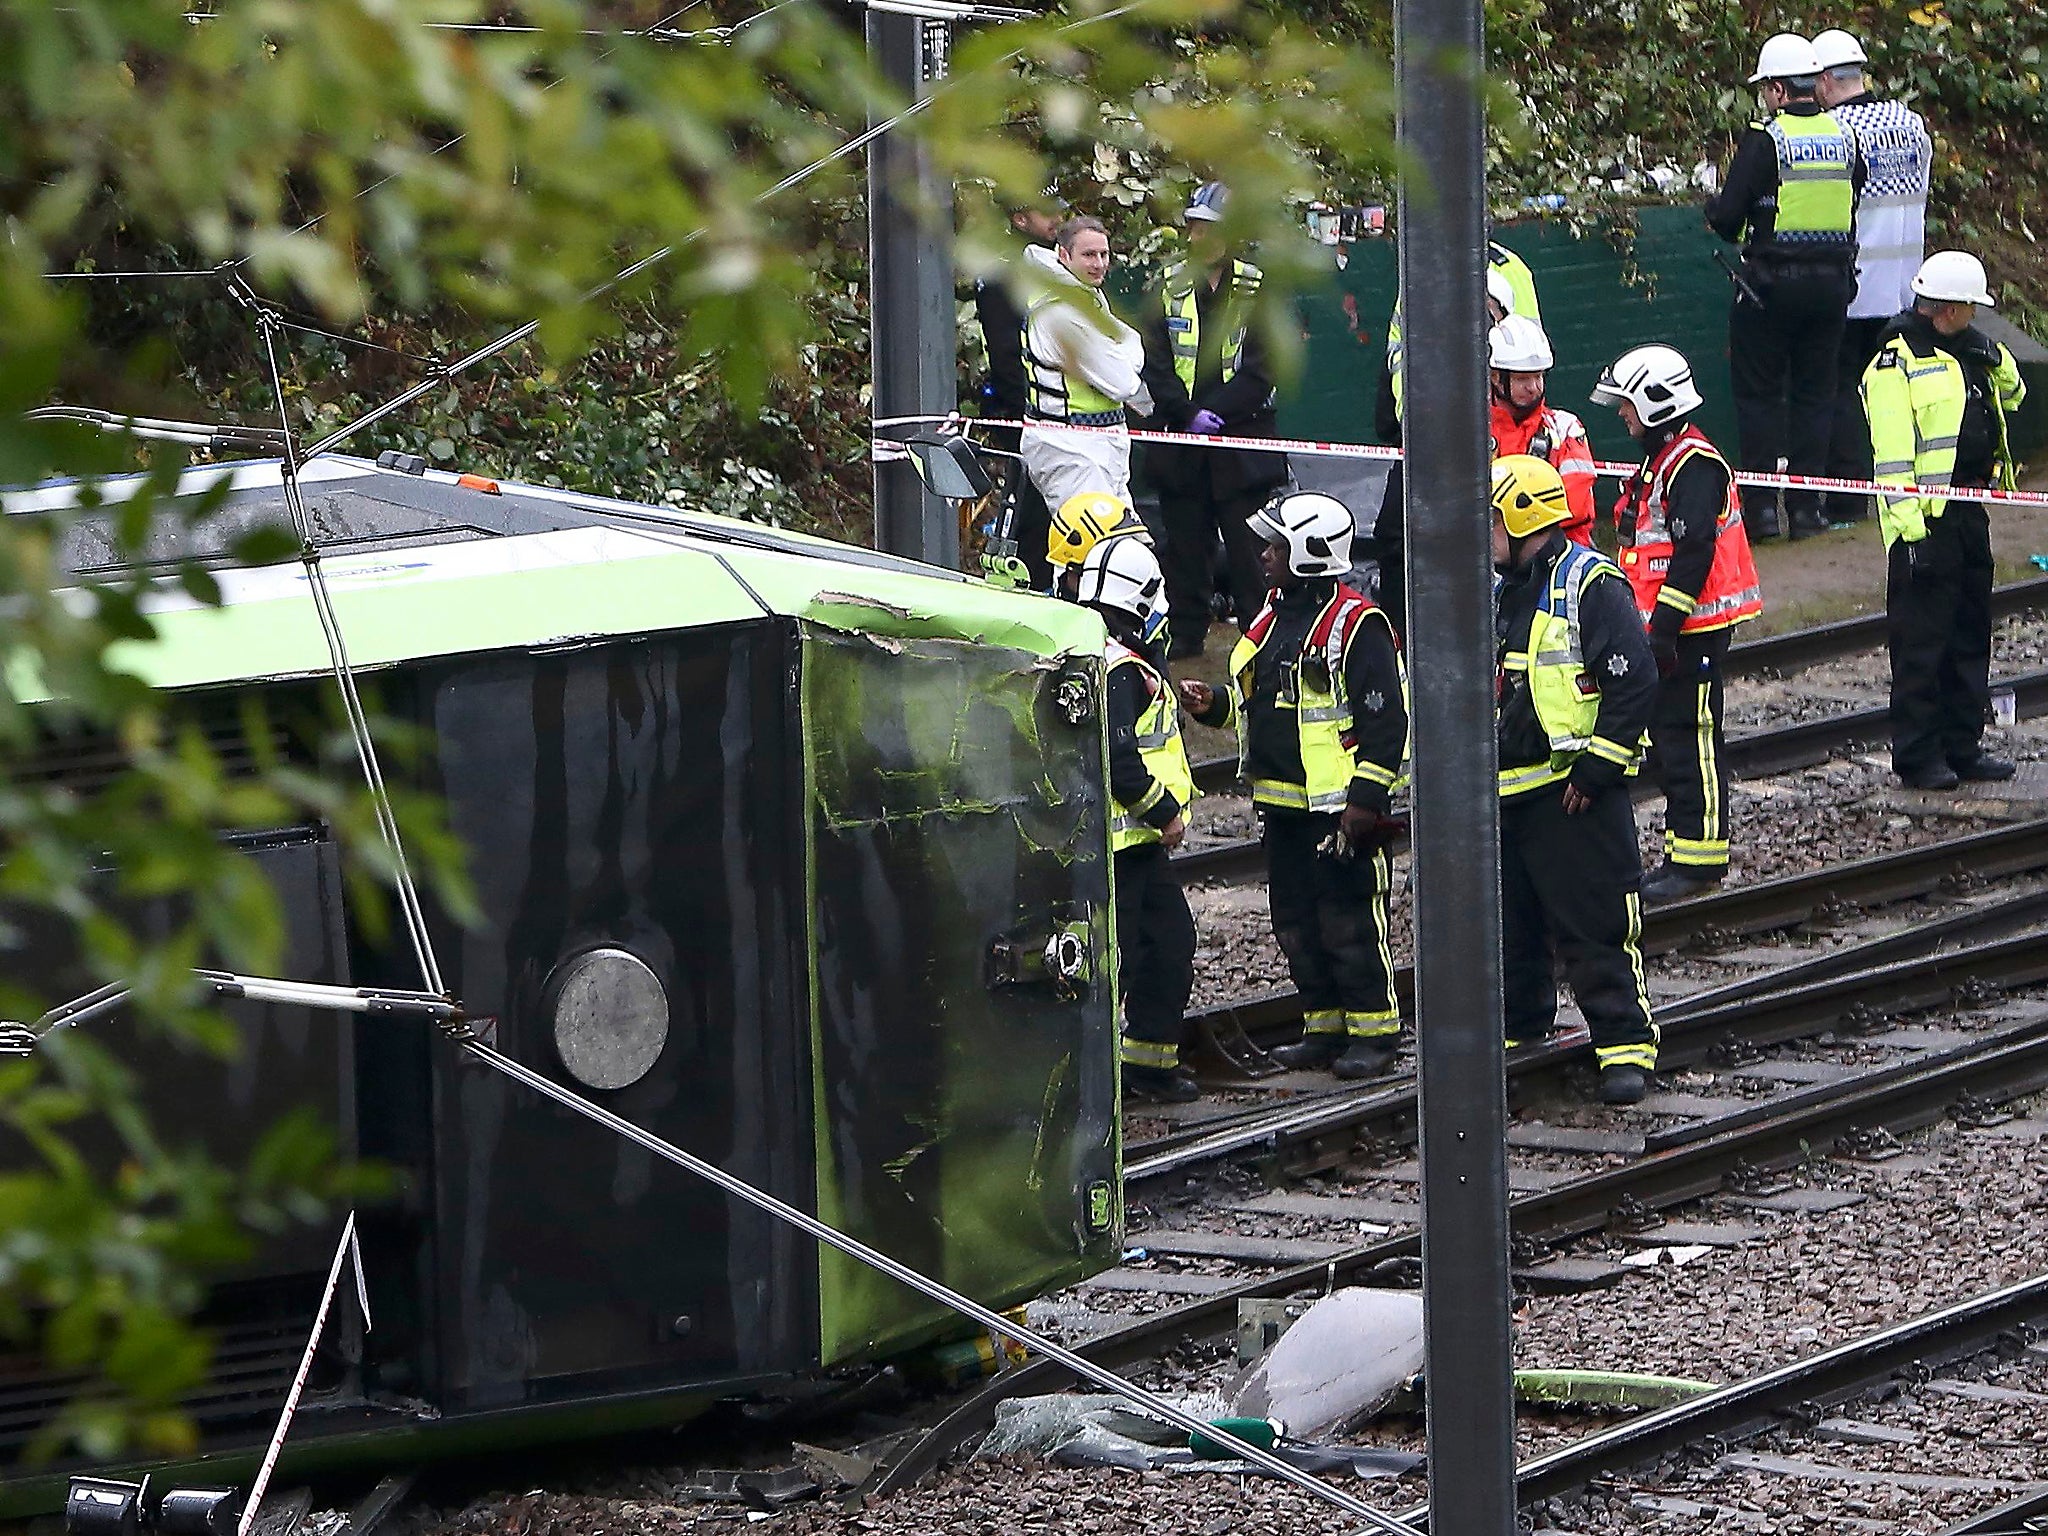 The accident happened after the tram made a sharp turn at 45 mph in heavy rain